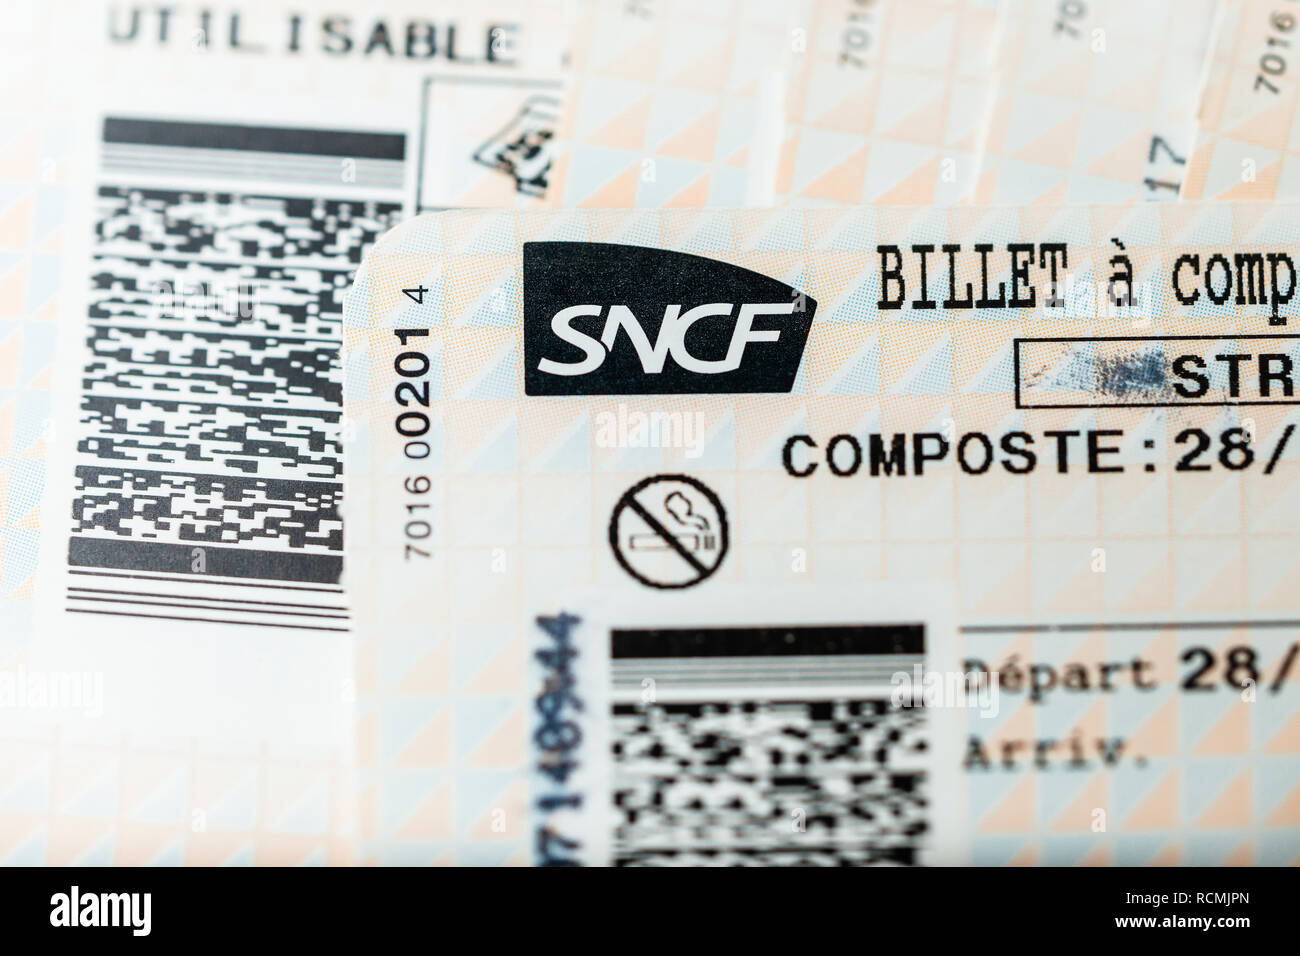 PARIS, FRANCE - JAN 14, 2015: Stack of multiple SNCF (Societe nationale des chemins de fer francais) train tickets seen from above randomly arranged on a table - close-up  Stock Photo